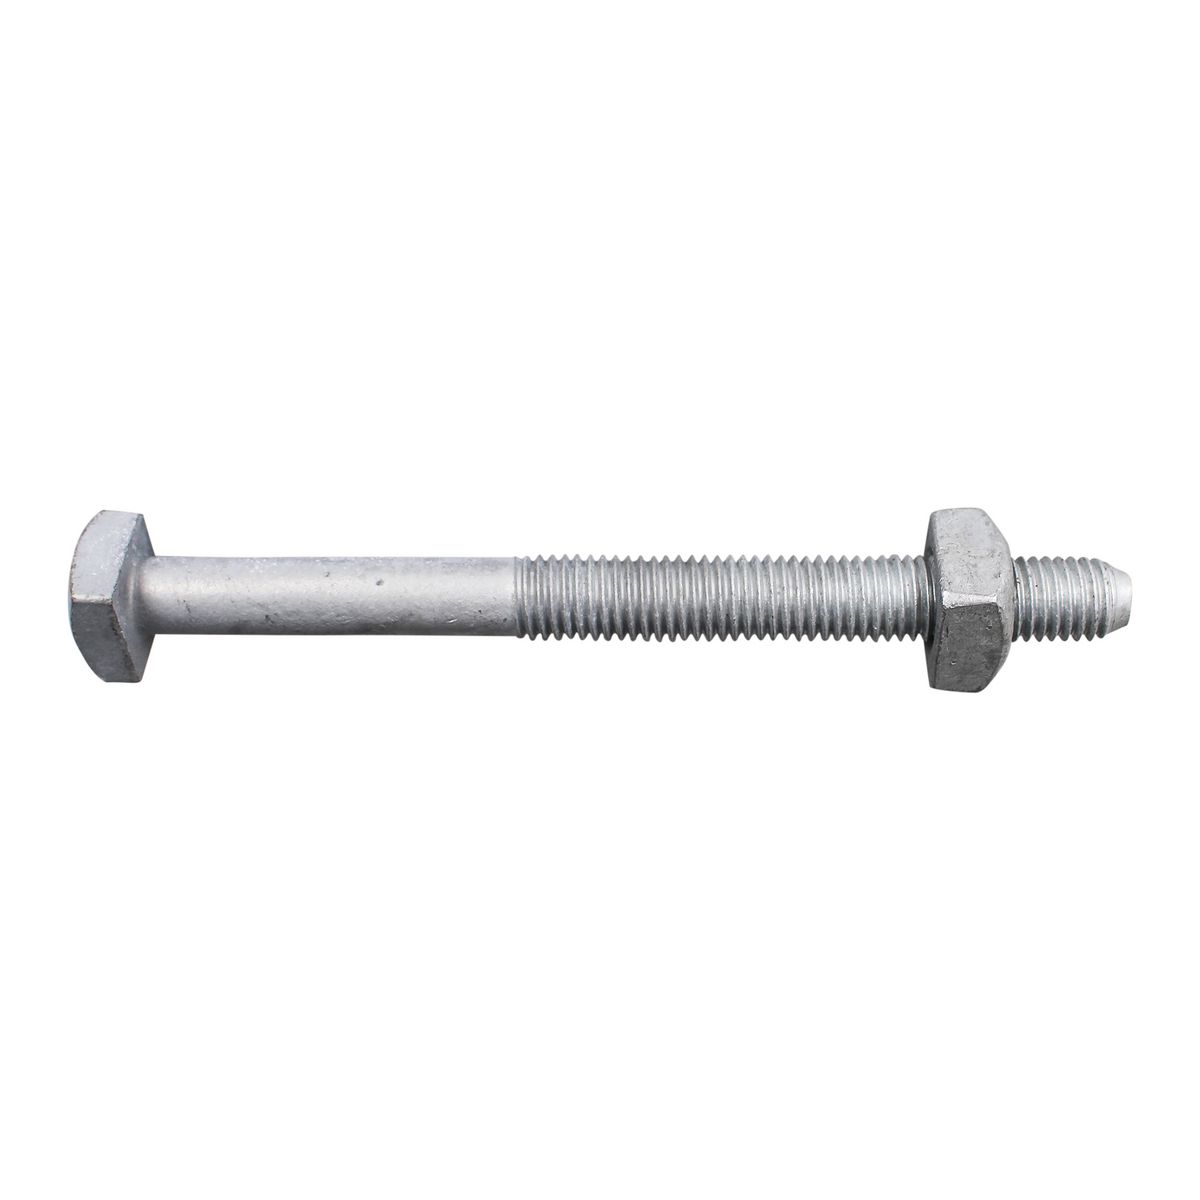 BOLT, MACHINE, SQ HEAD, 1/2in x 6in | 8706 | Hubbell Power Systems